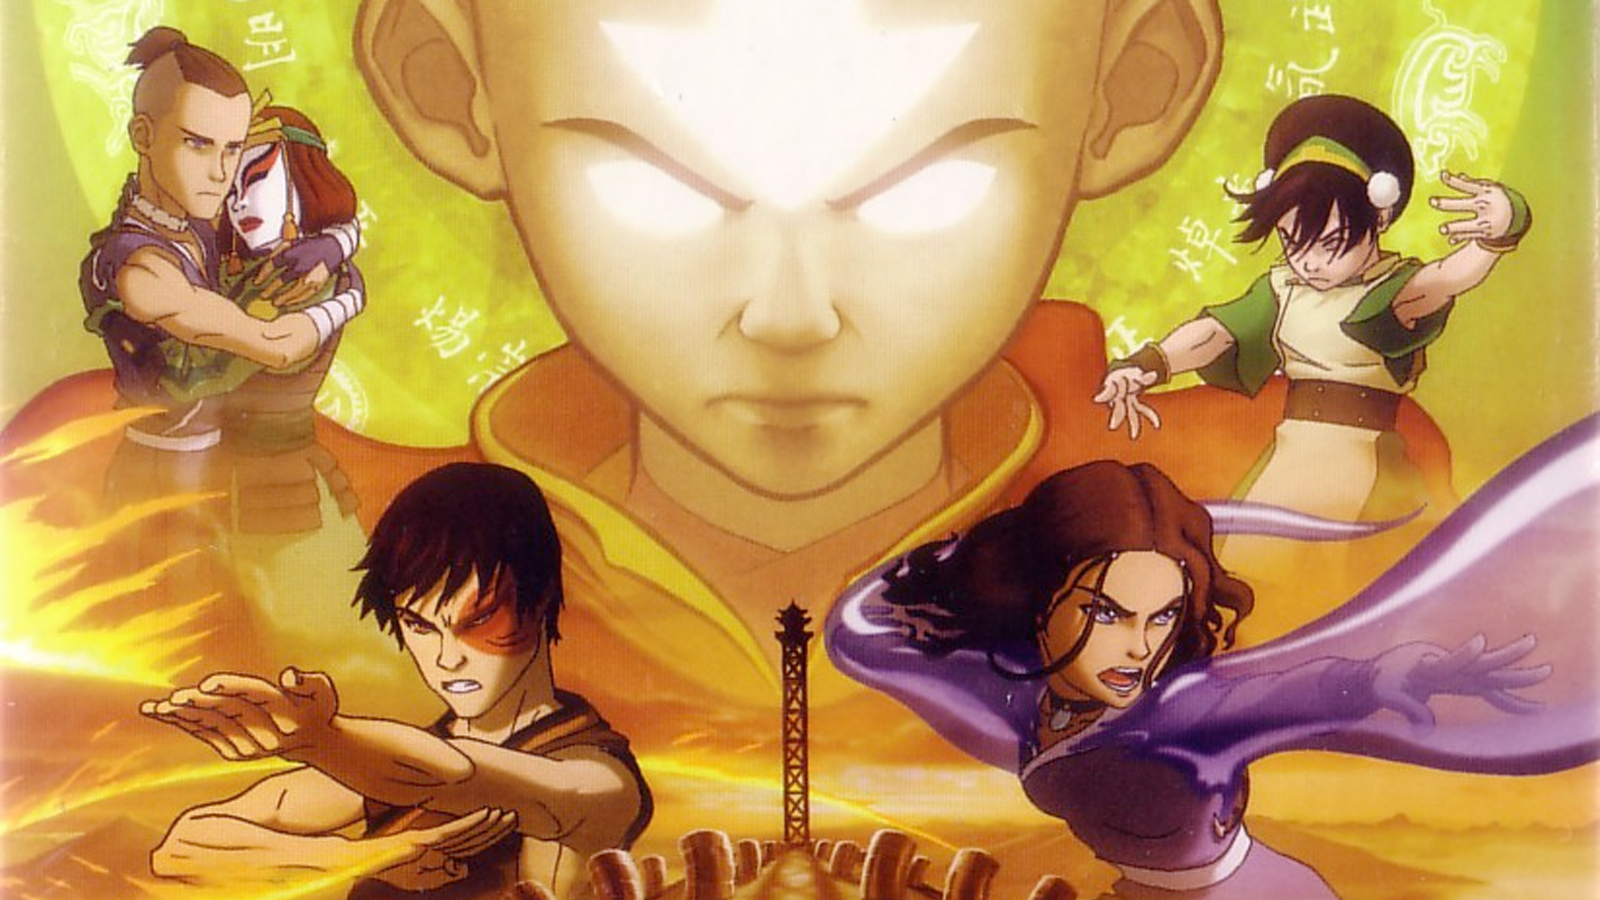 Free download Avatar The Last Airbender Computer Wallpapers.